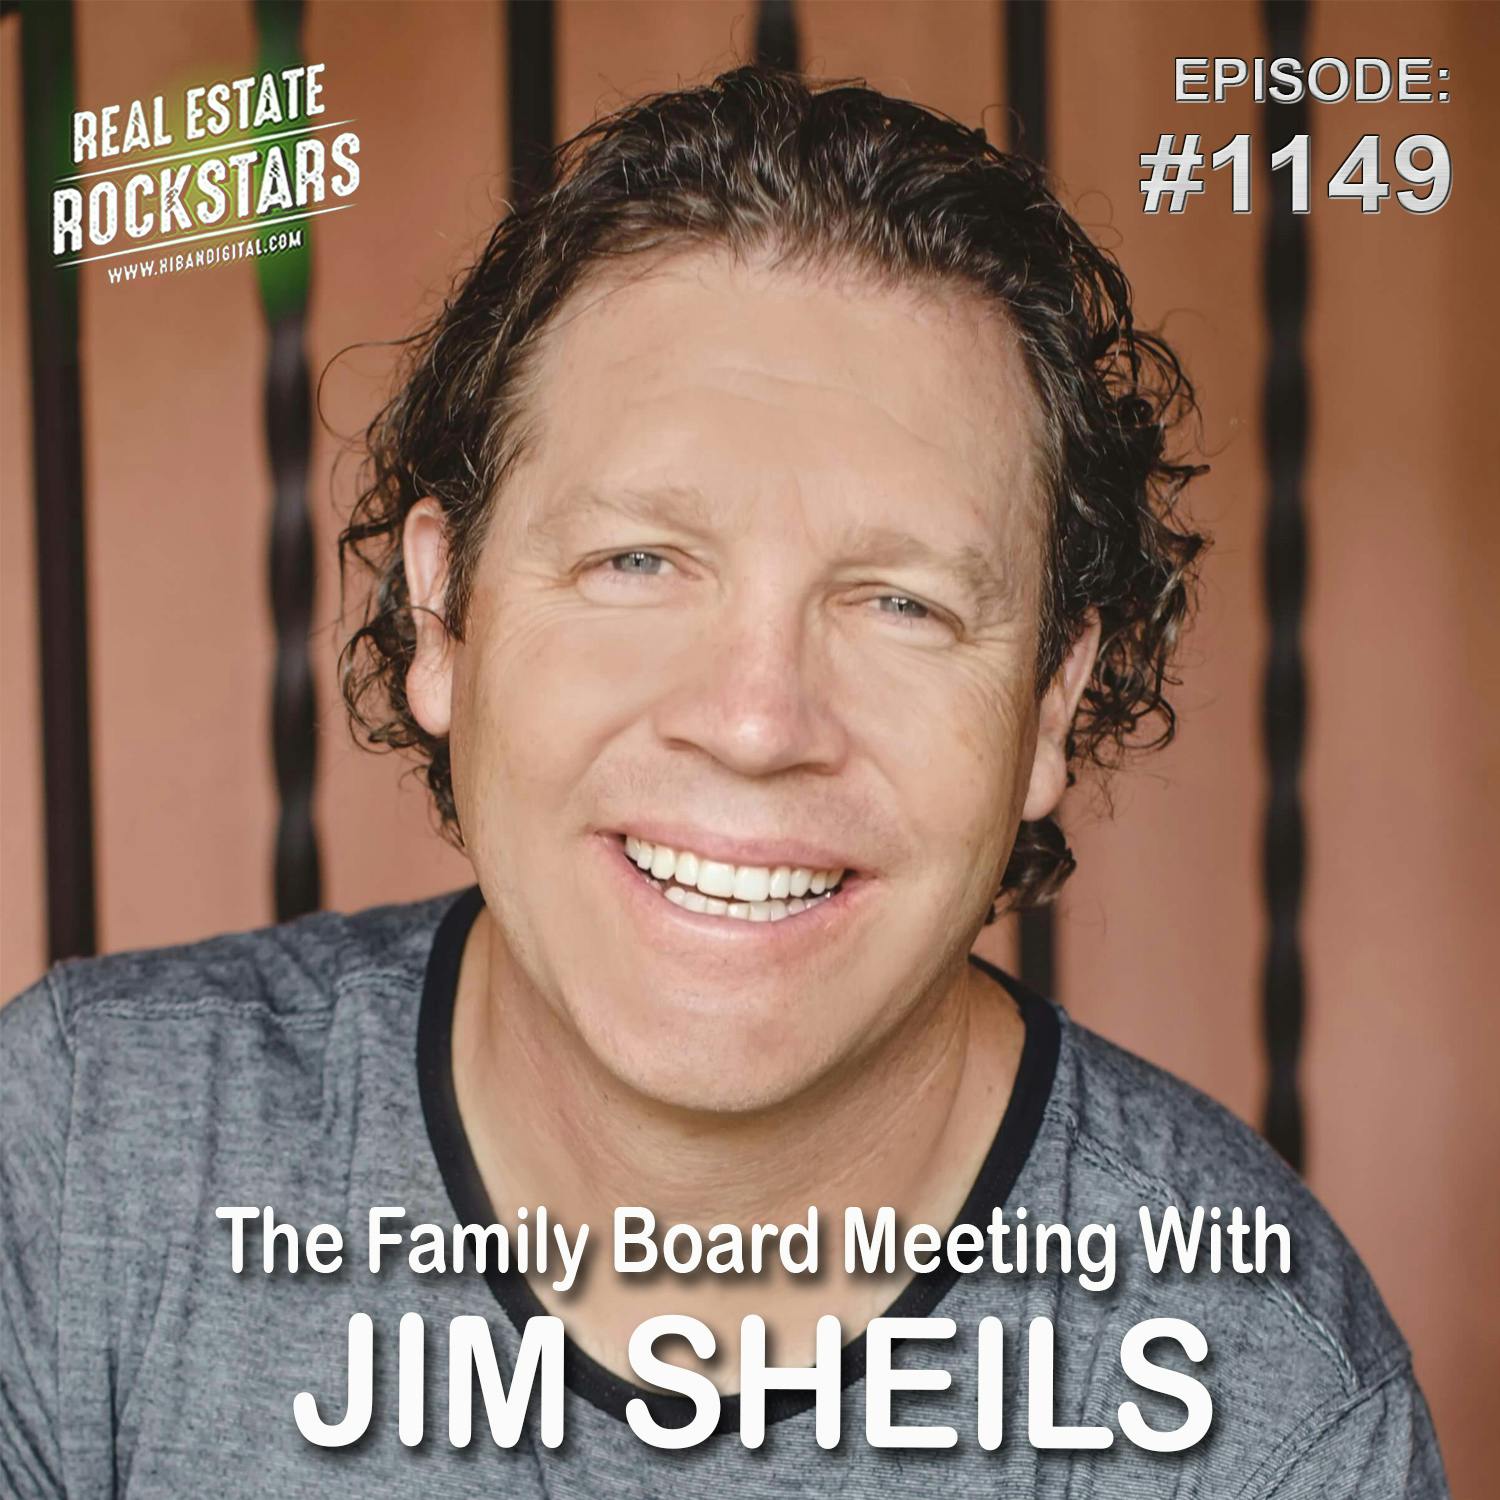 1149: The Family Board Meeting With Jim Sheils